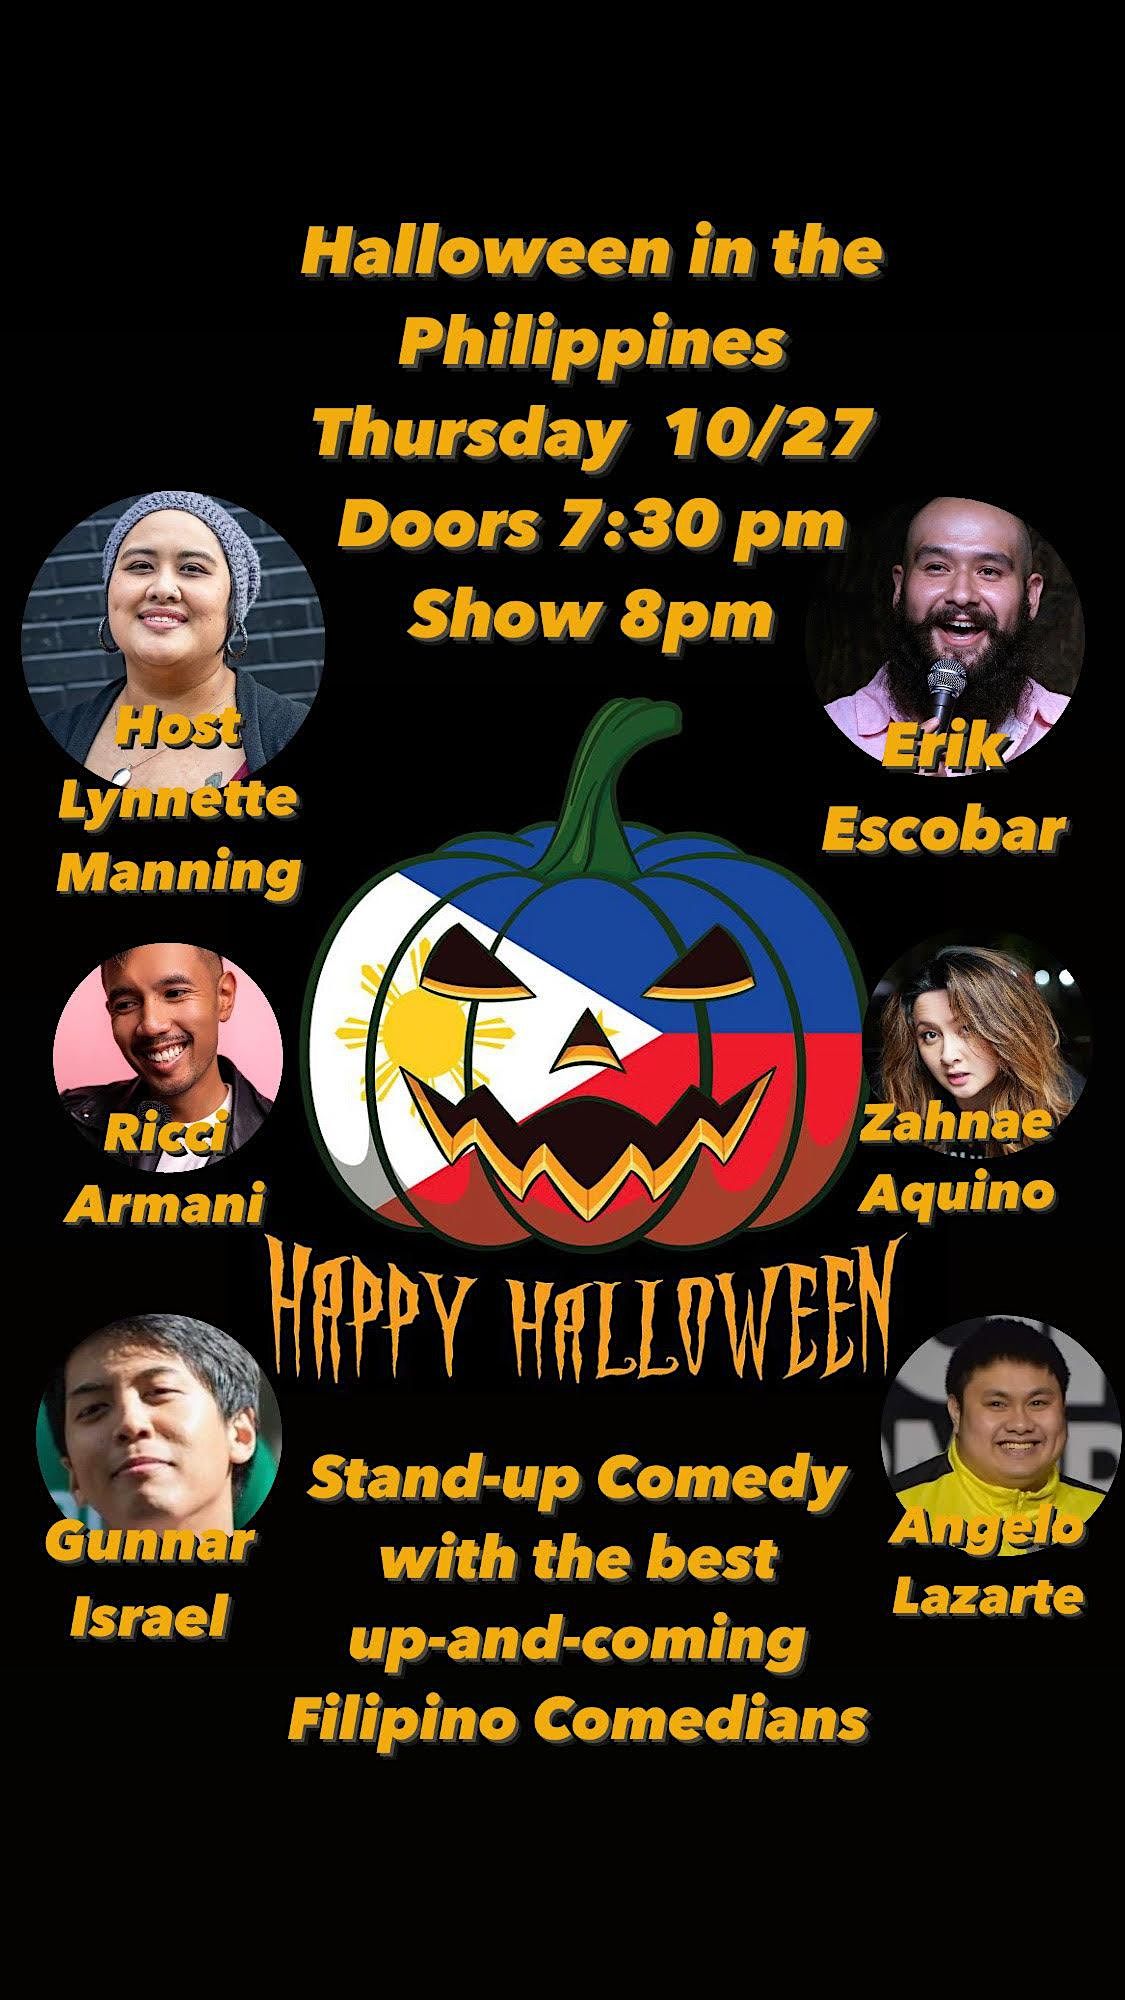 Halloween in the Philippines: An Evening with Filipino Stand-up Comedians